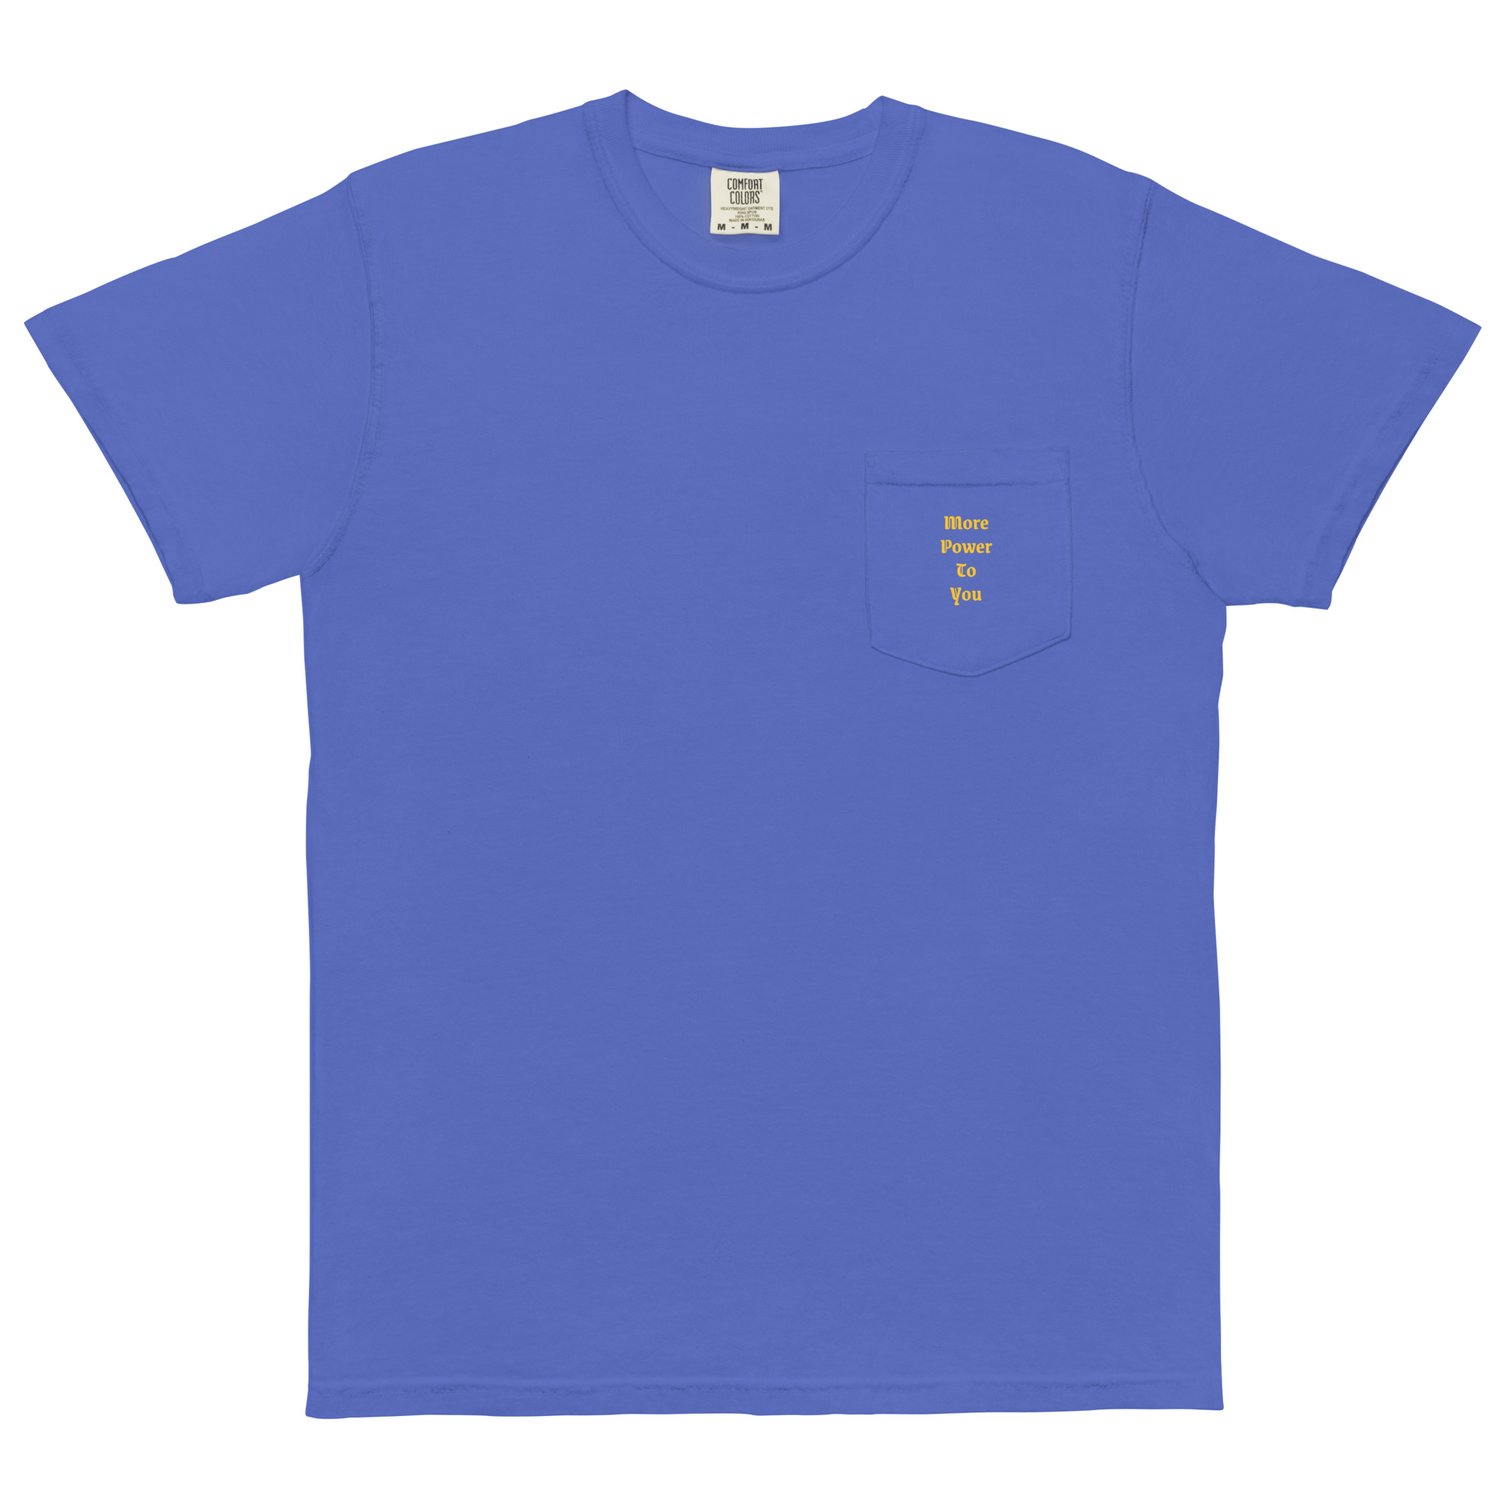 Image of "More Power To You" Unisex garment-dyed pocket t-shirt